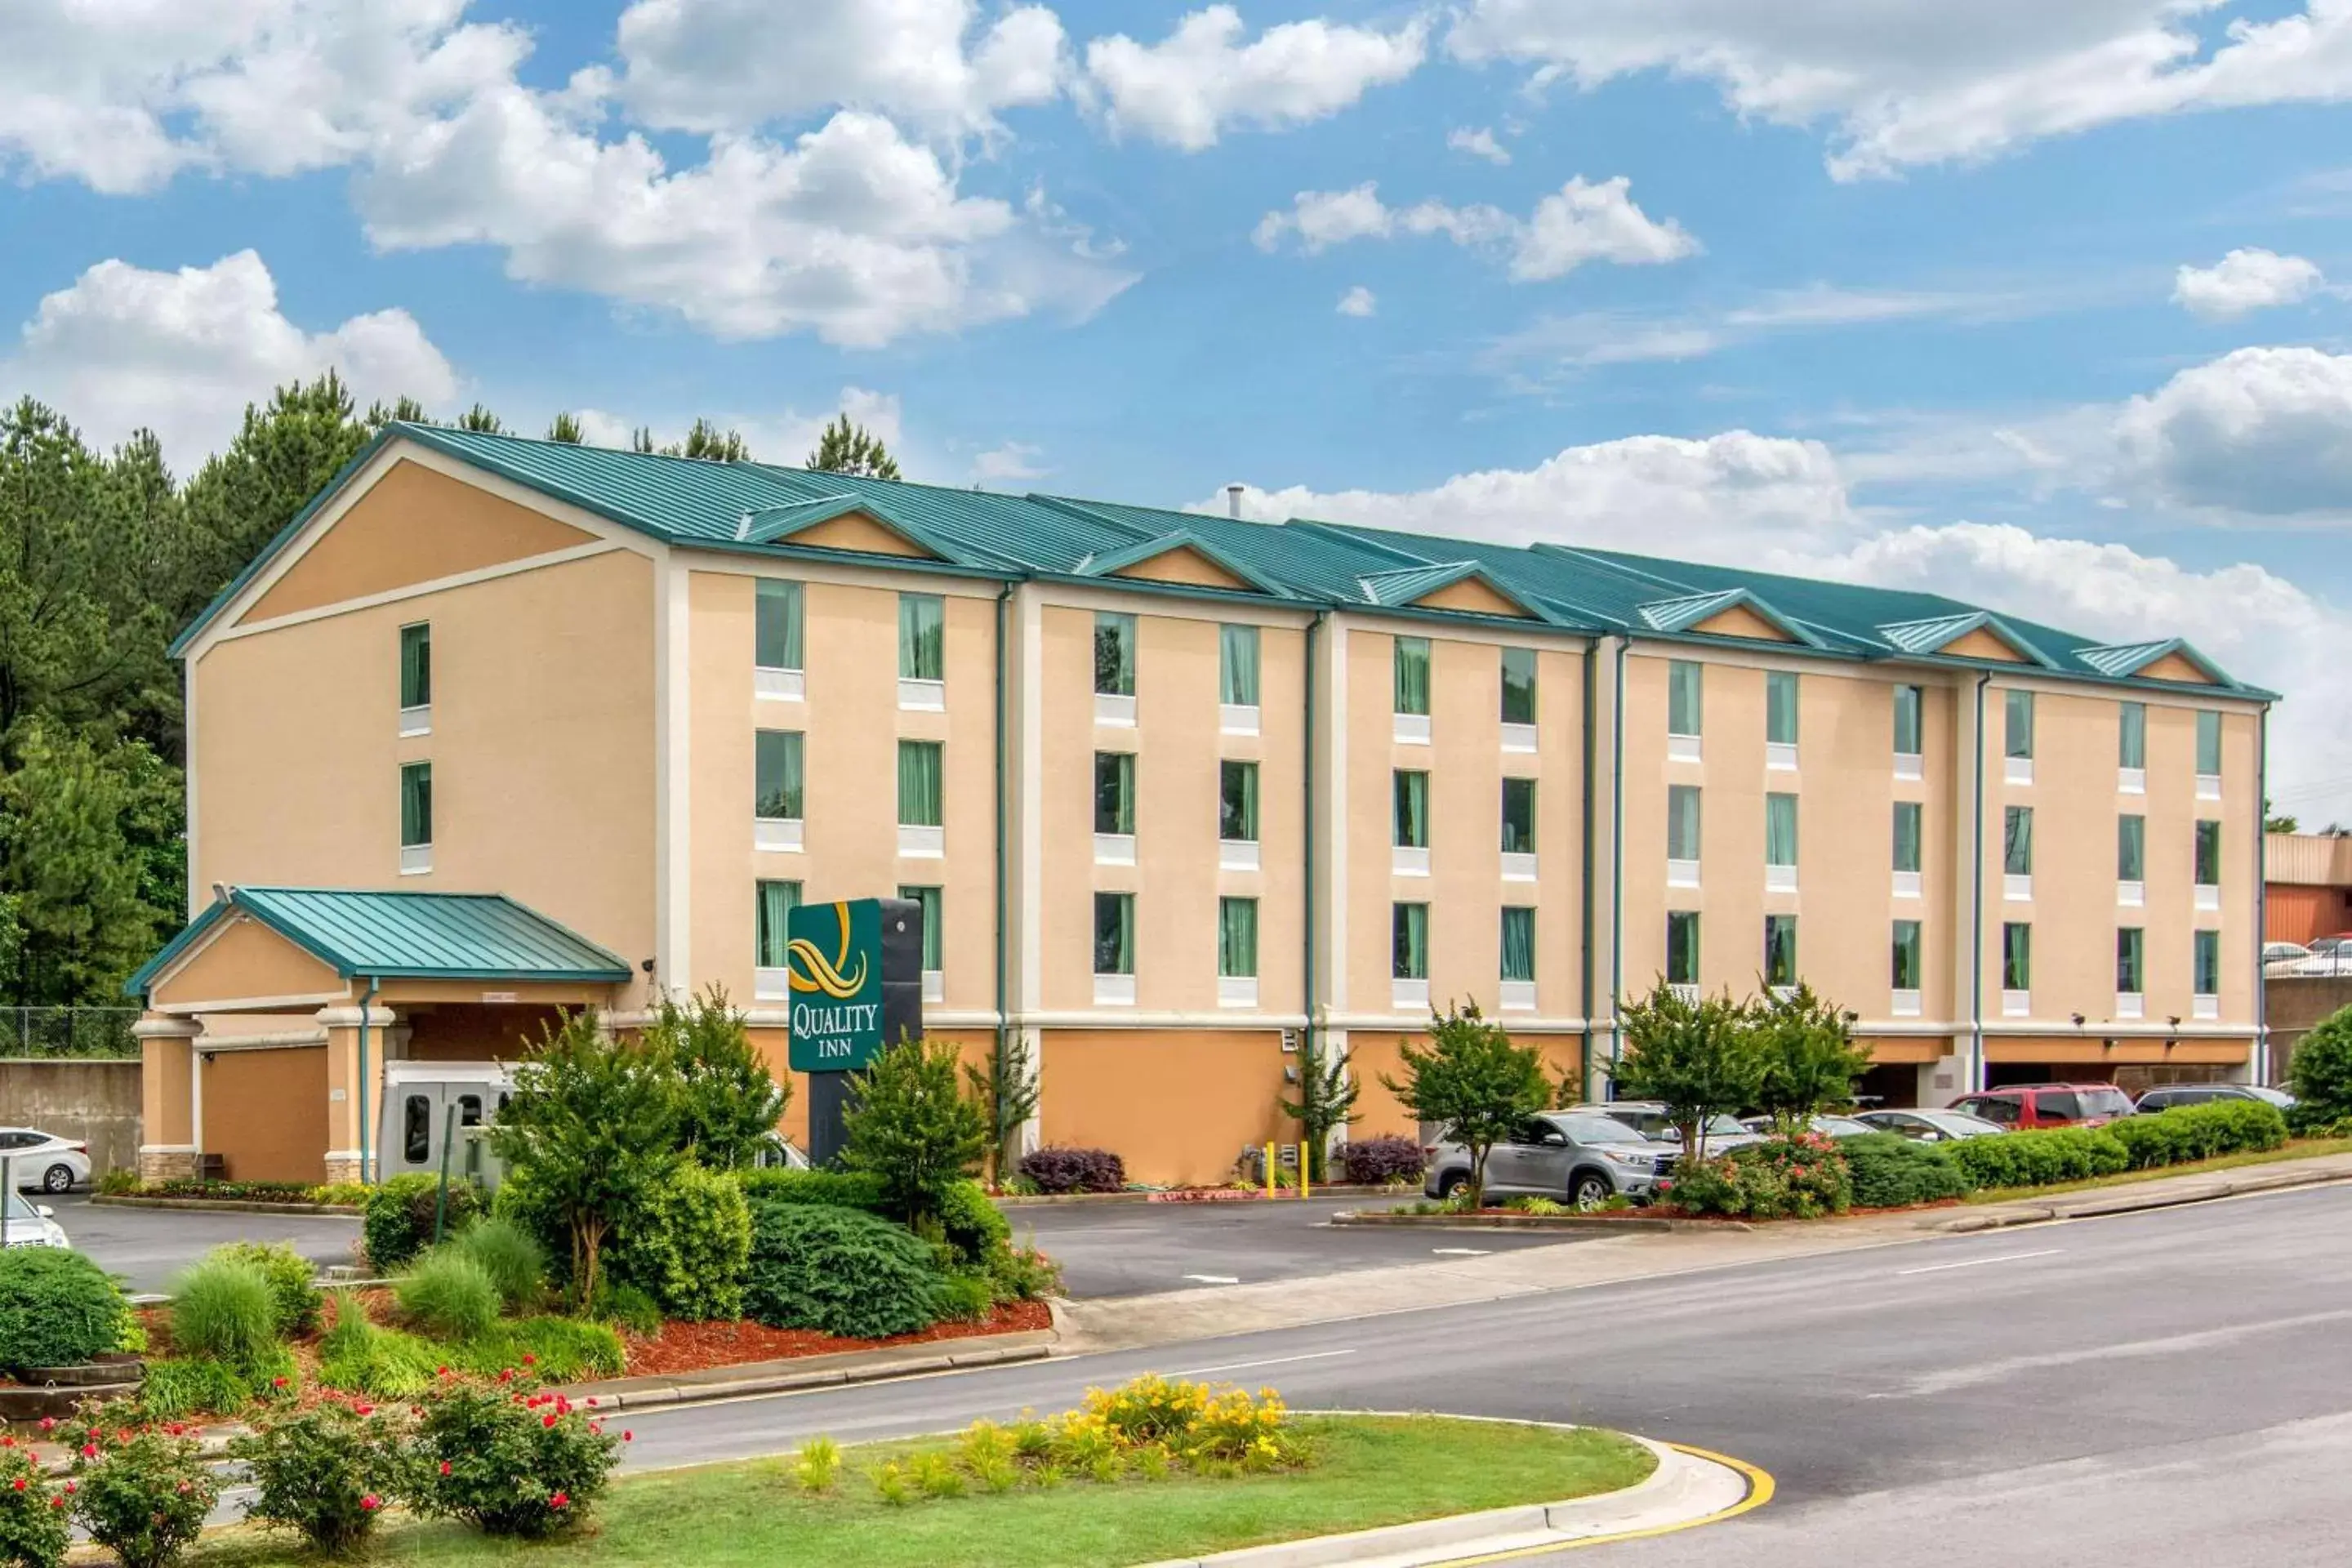 Property Building in Quality Inn & Suites Union City - Atlanta South